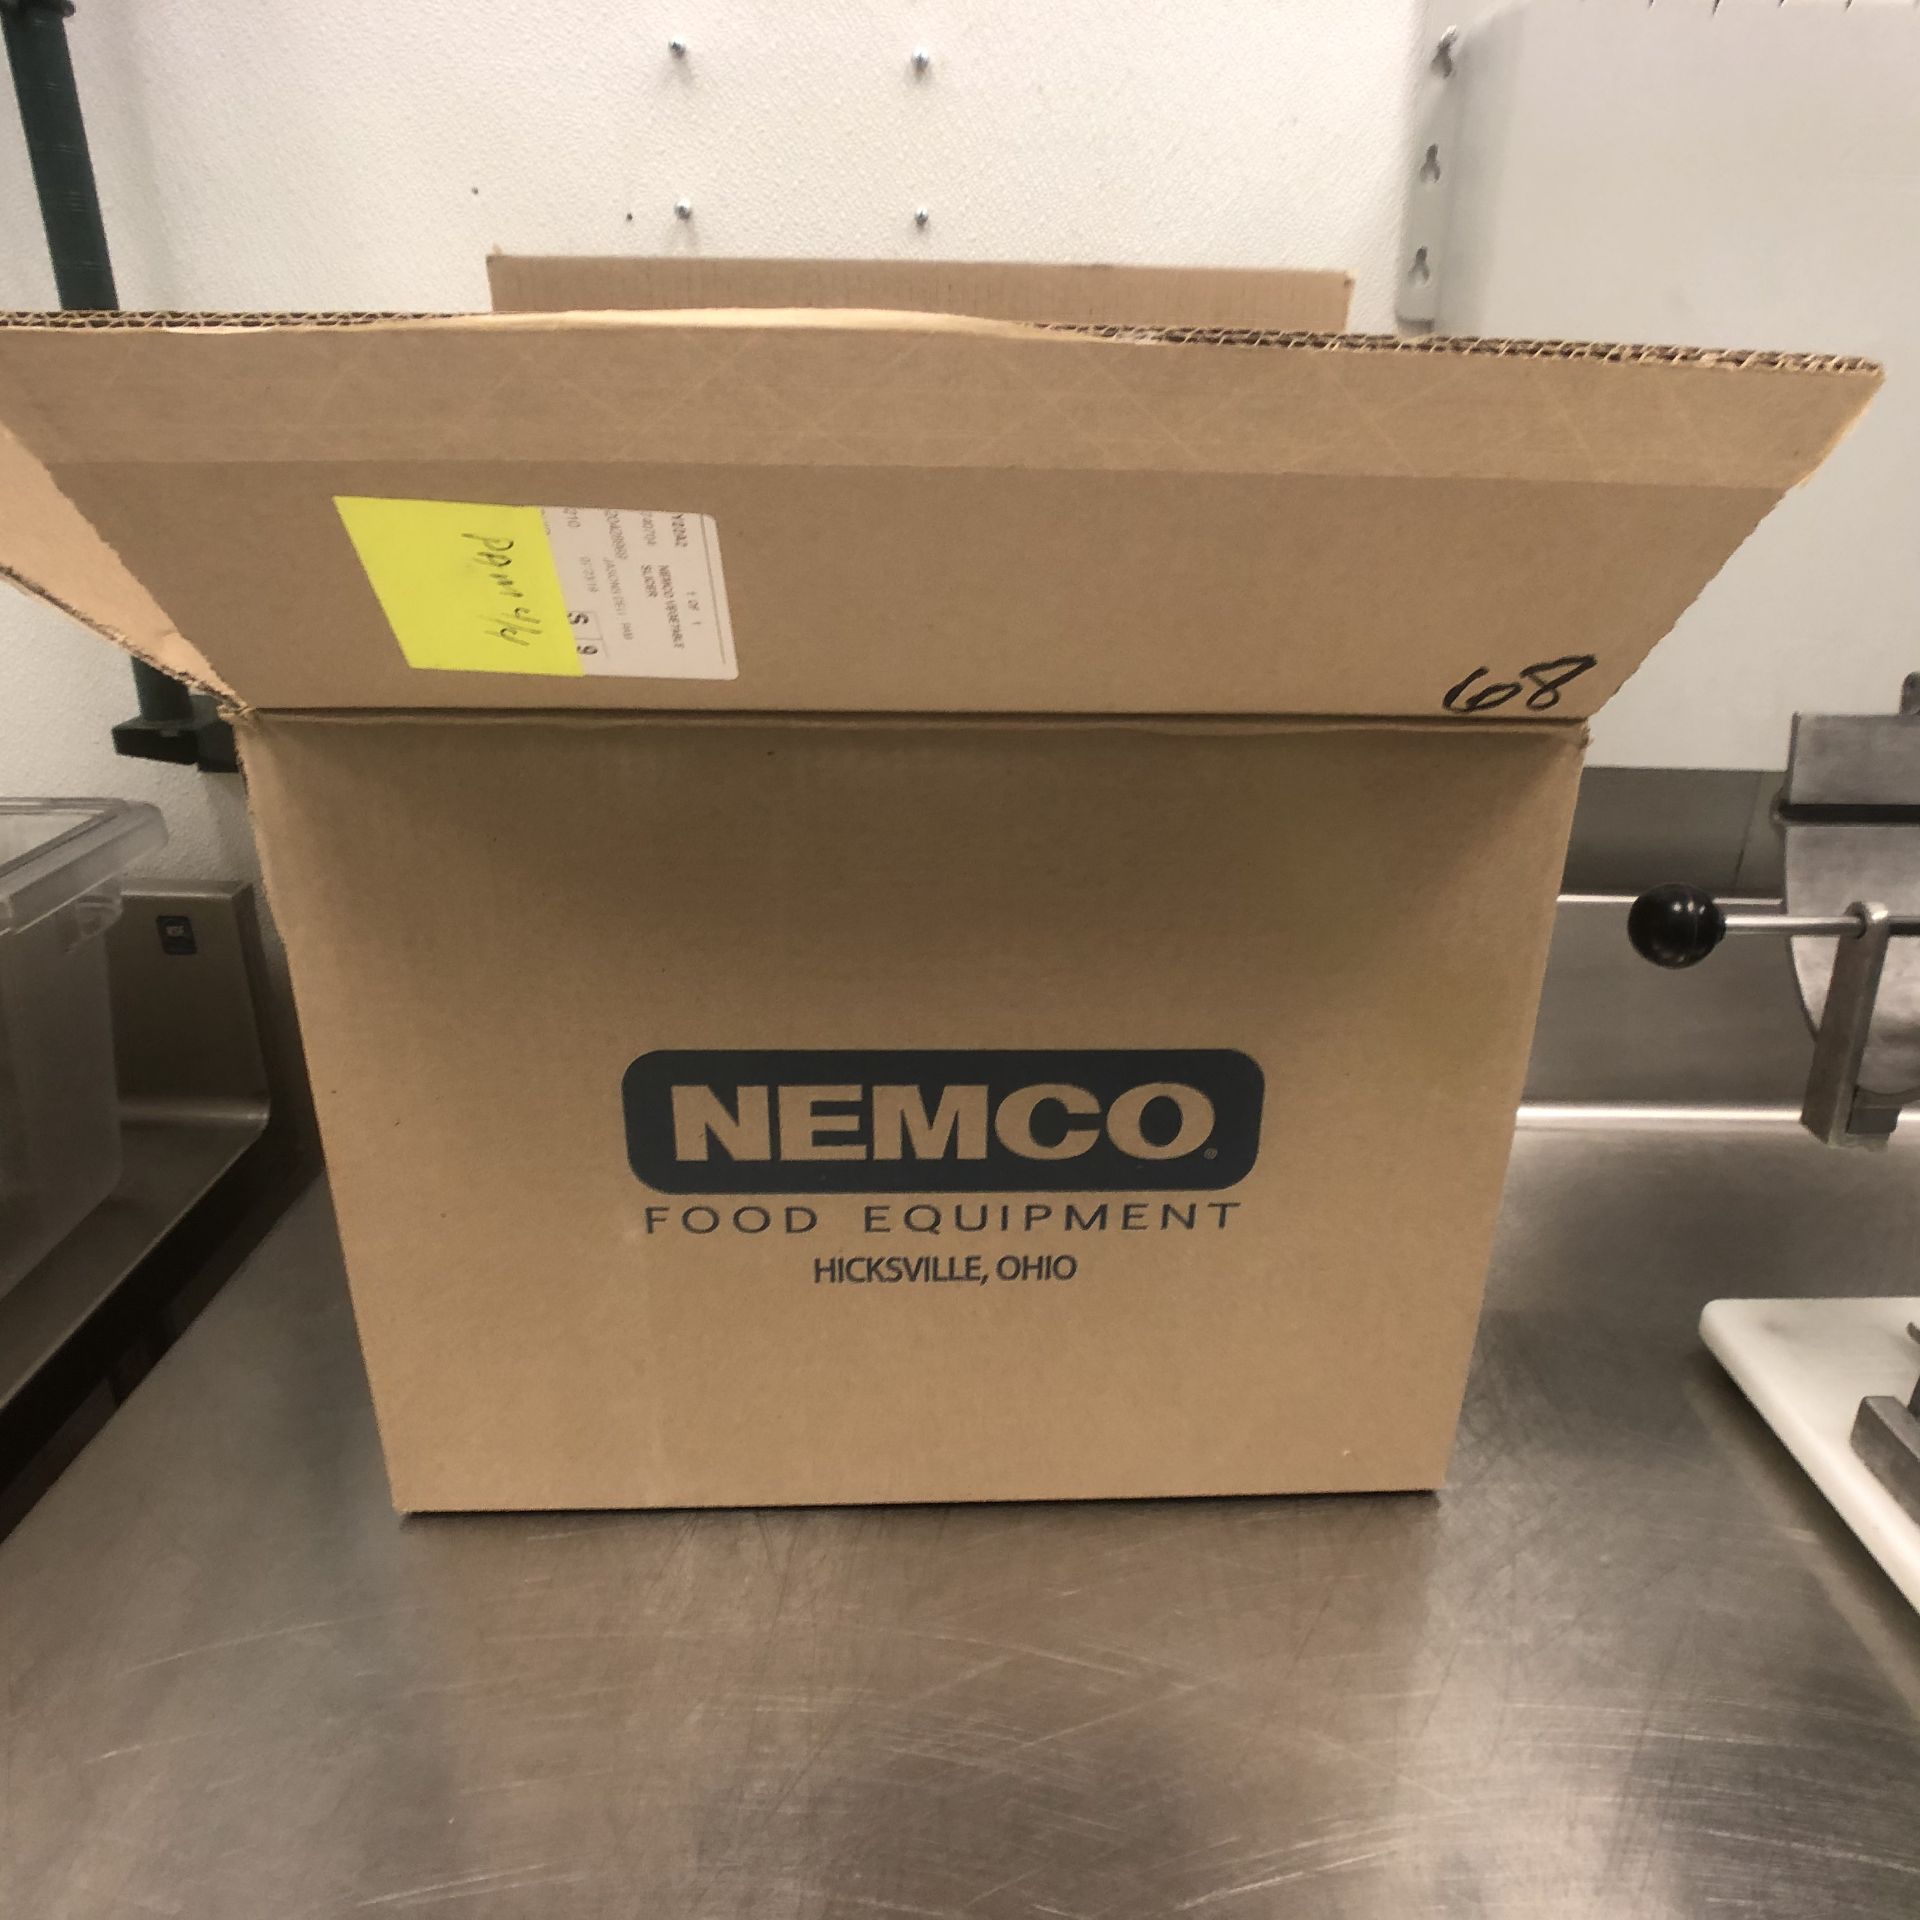 Nemco Fruit and Vegetable Slicers - Image 3 of 5